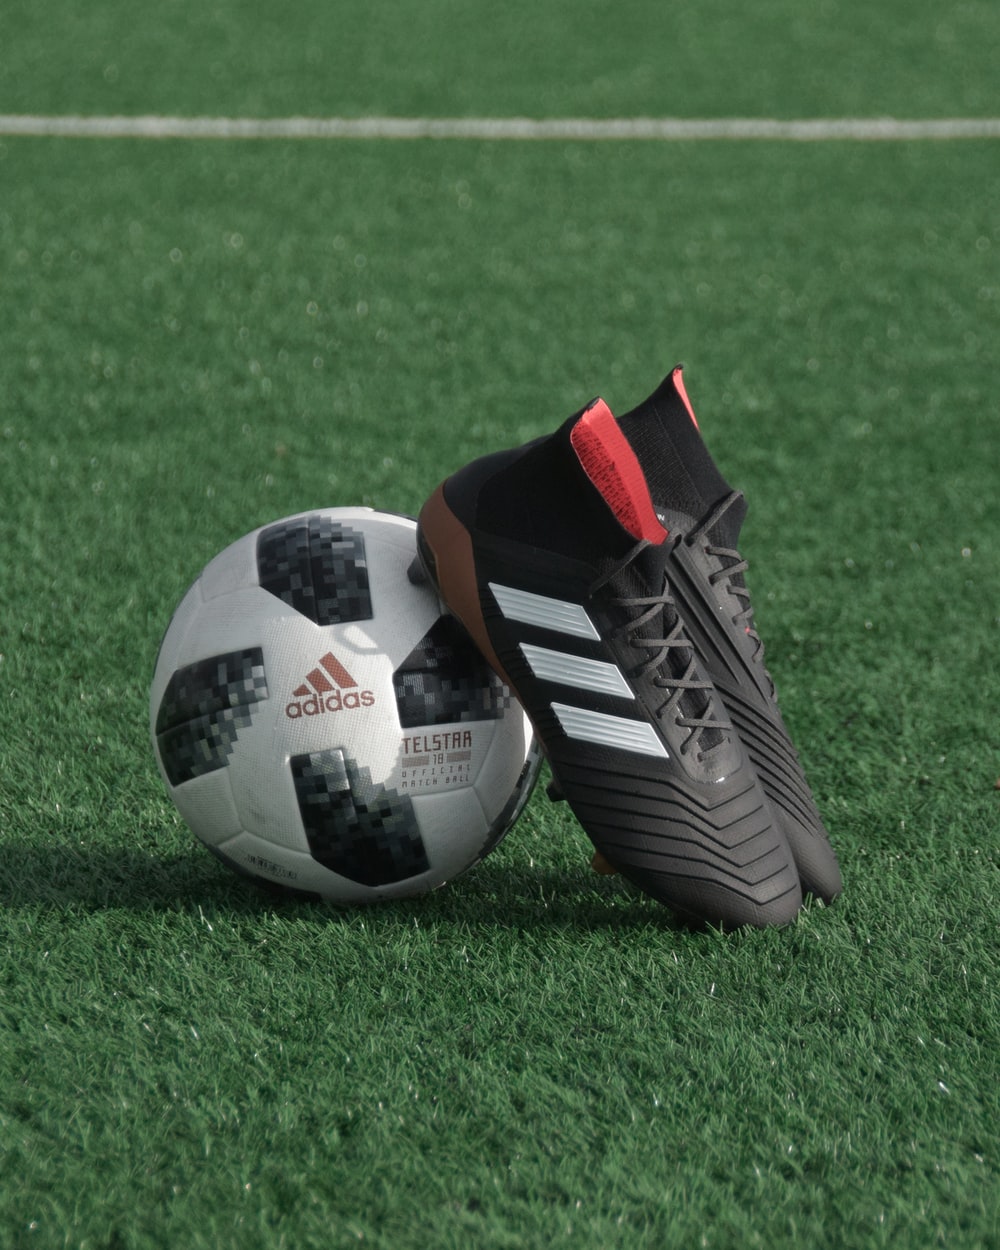 black adidas cleats lean on white and black adidas soccer ball on green grass photo